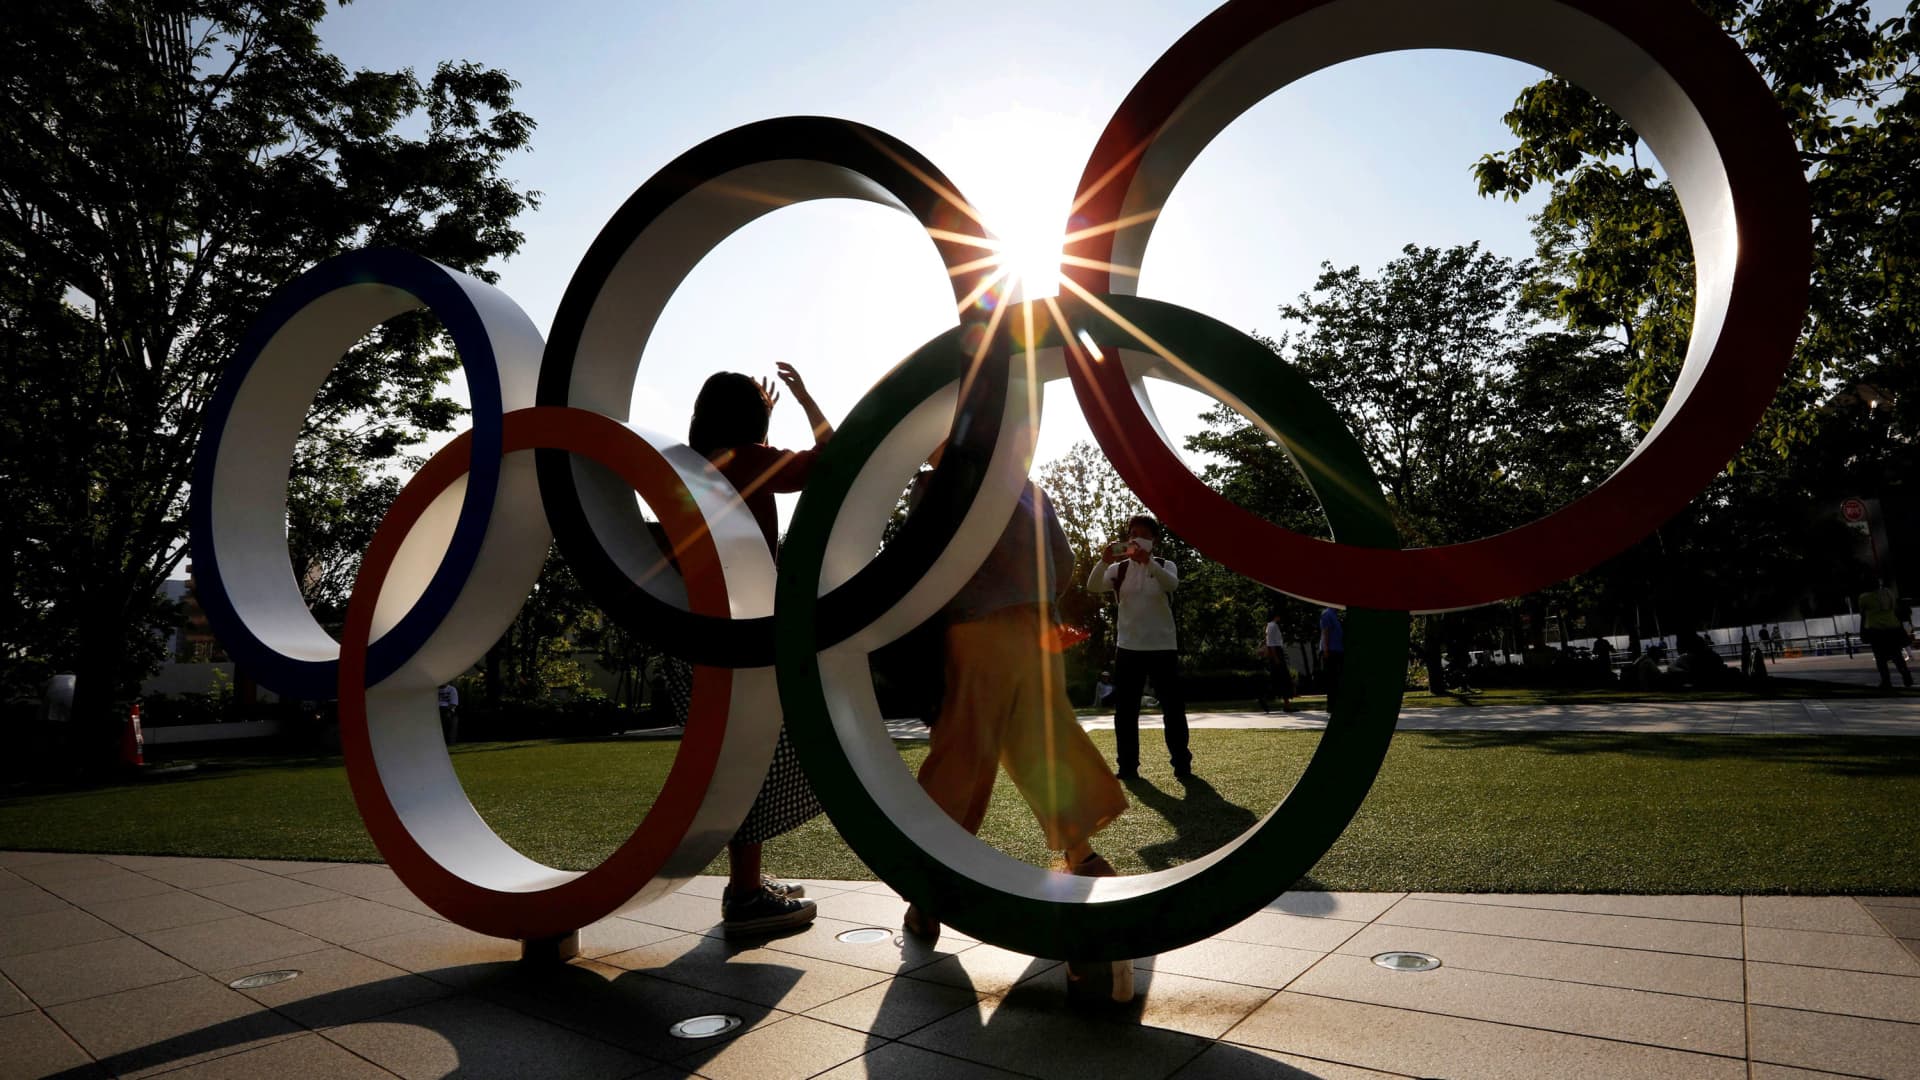 Visitors try to take photos in front of the Olympic Rings monument outside the Japan Olympic Committee (JOC) headquarters near the National Stadium, the main stadium for the 2020 Tokyo Olympic Games that have been postponed to 2021 due to the coronavirus disease (COVID-19) outbreak, in Tokyo, Japan May 30, 2021.